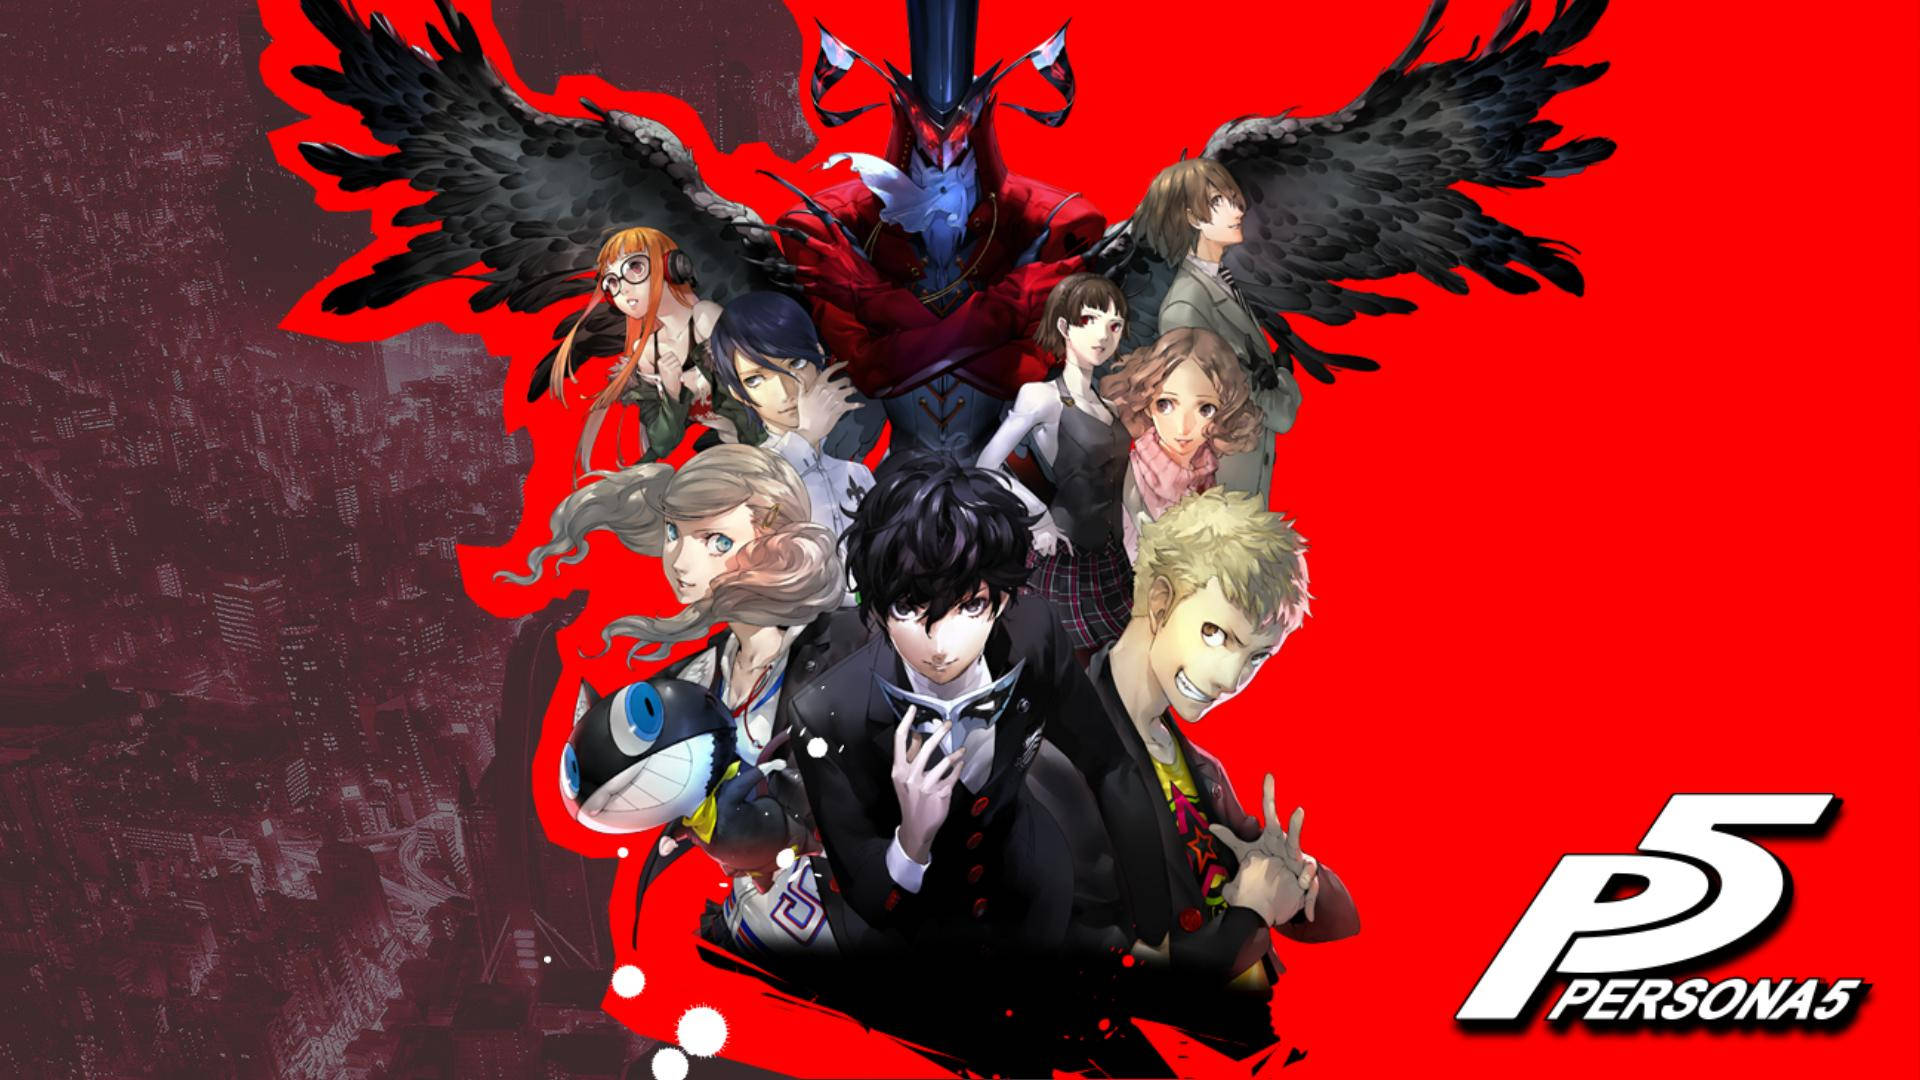 'The Phantom Thieves are Ready to Battle in Persona 5' Wallpaper